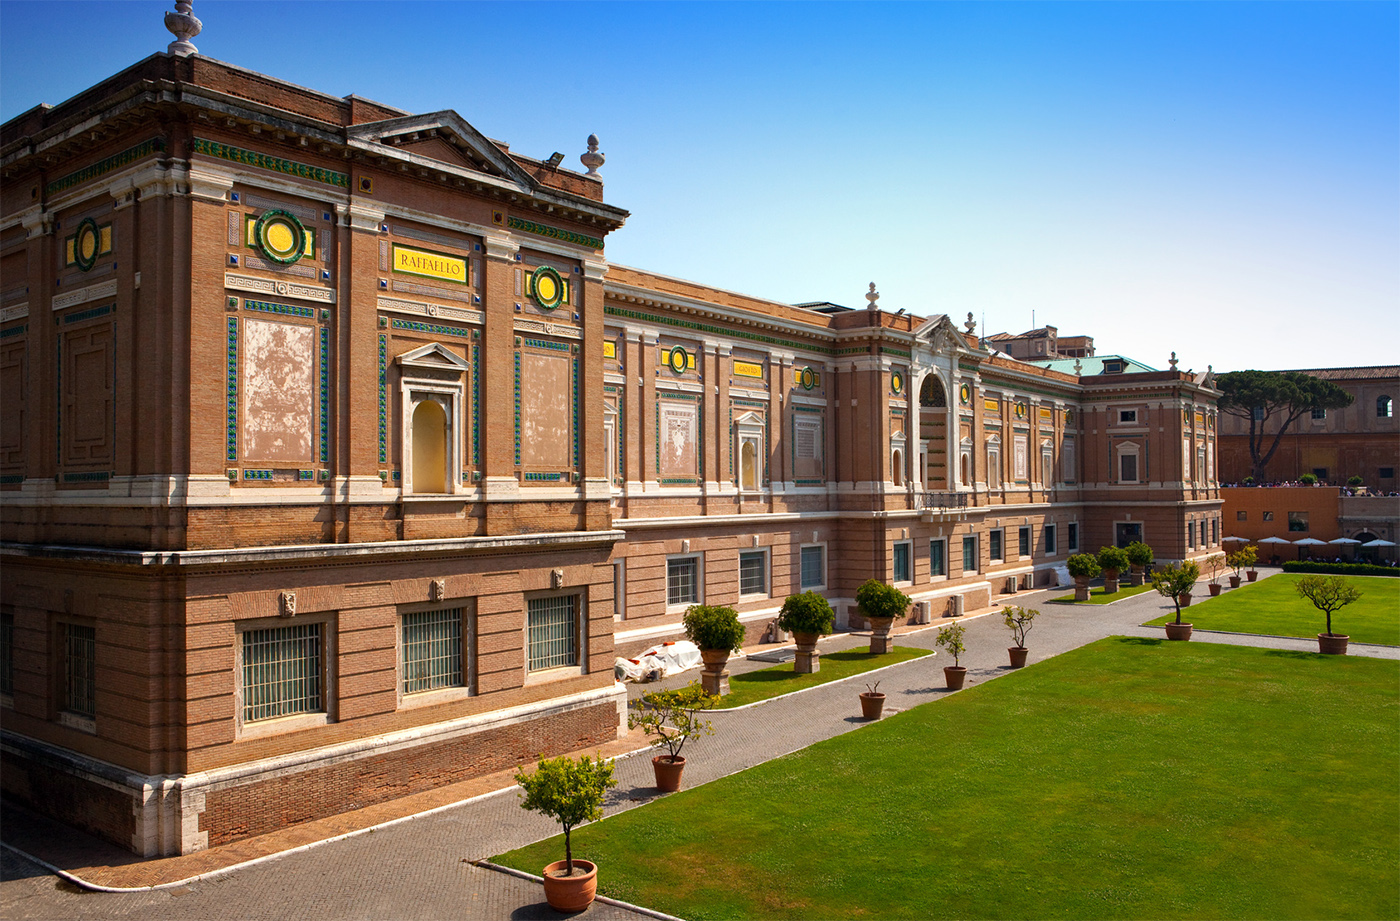 The building containing the Vatican Pinacoteca